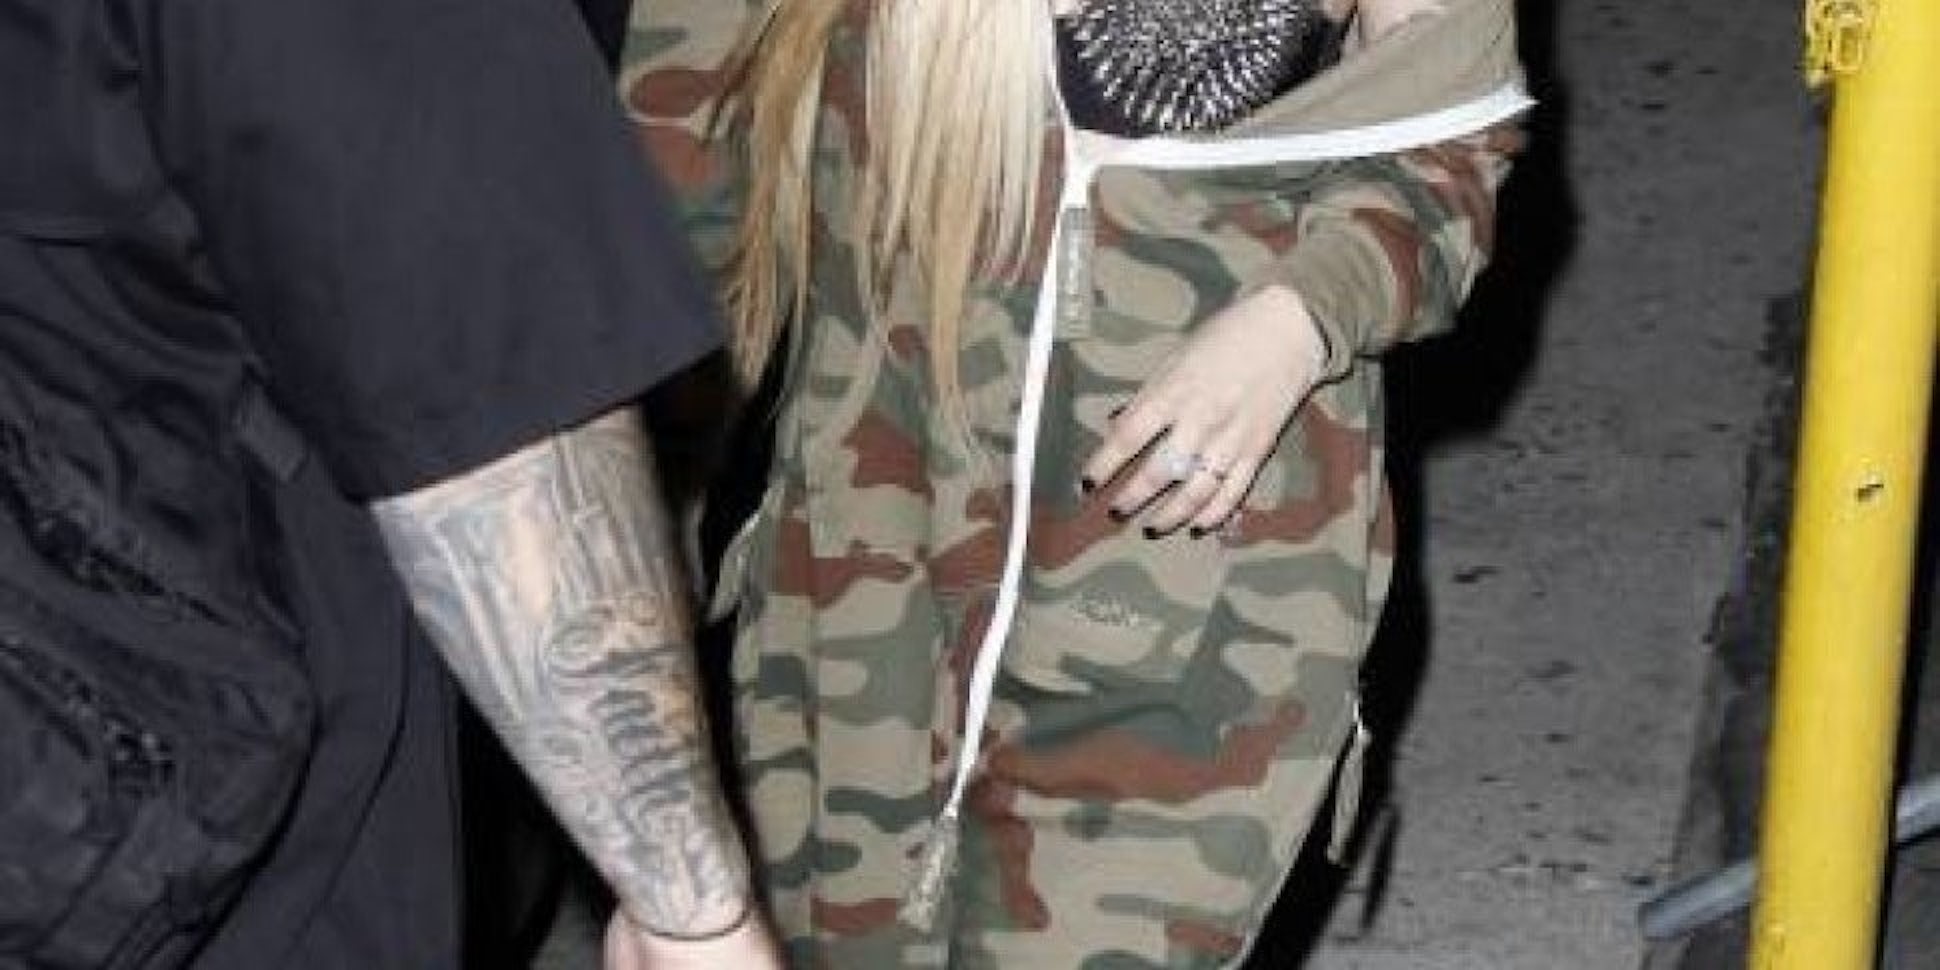 Onepiece Blog Check Our Latest News Avril Lavigne In Camo Onepiece